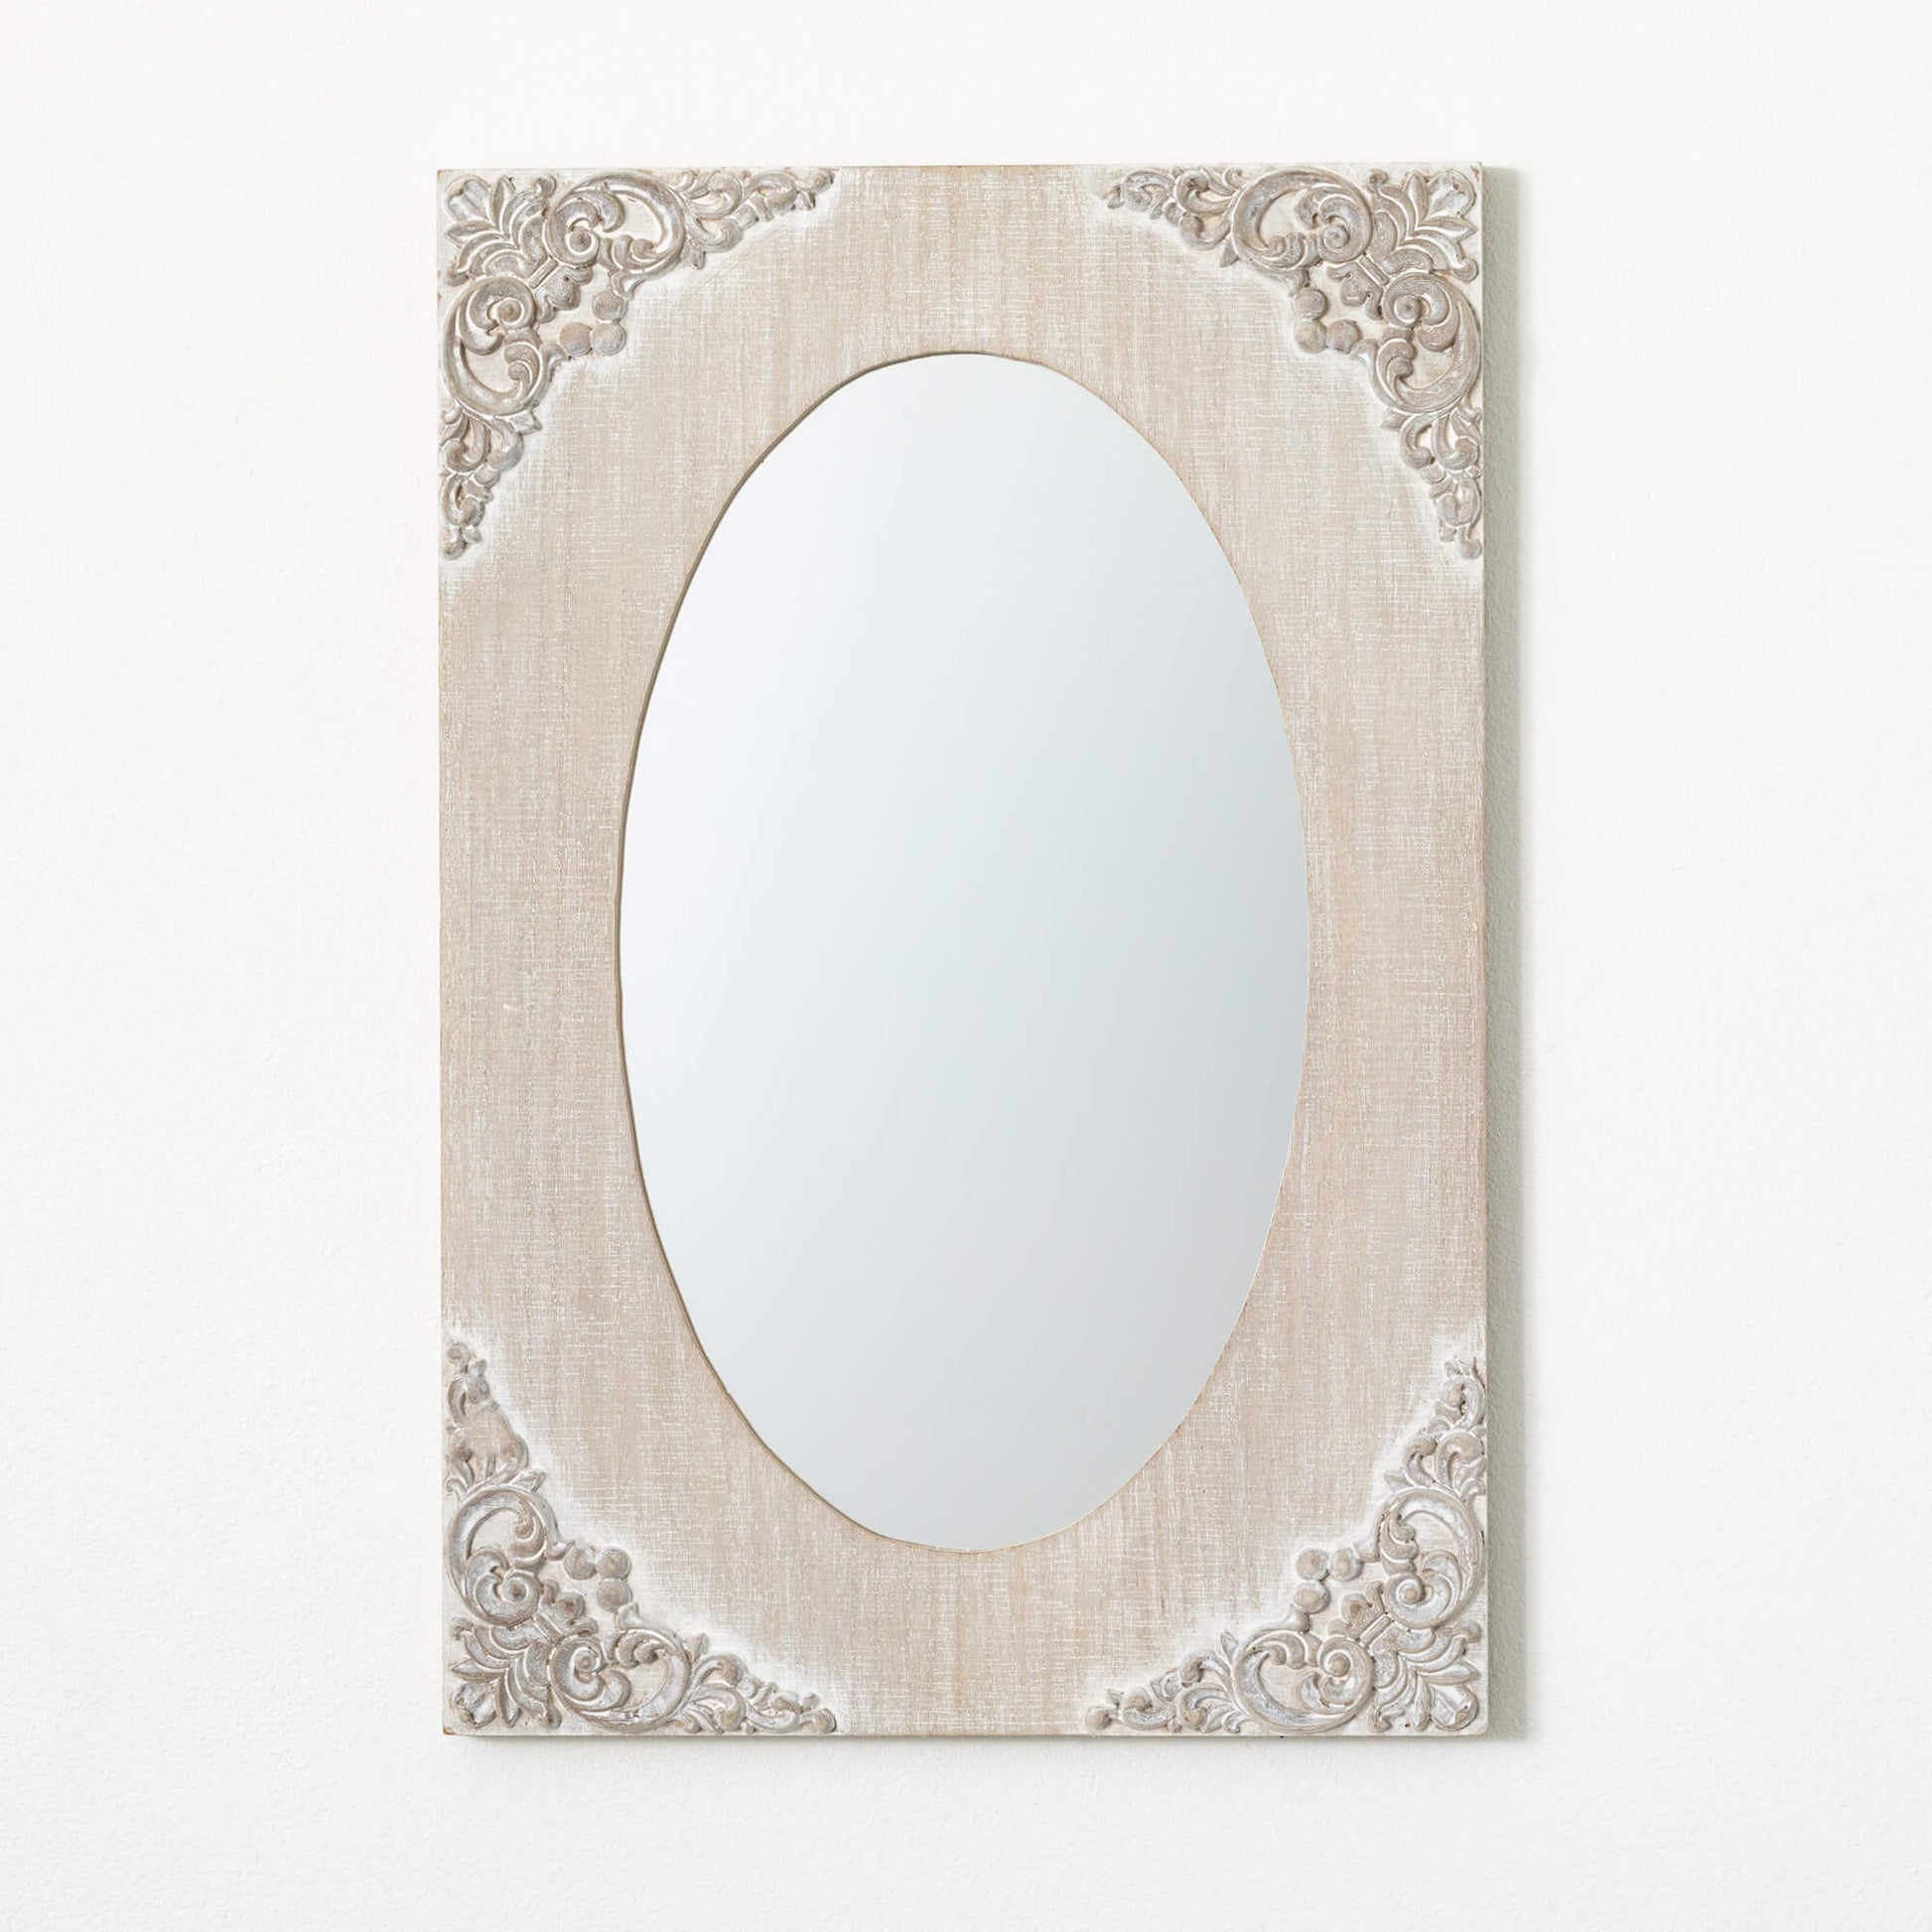 french-country-carved-mirror-mirrors-sulllivan-Threadbare Gypsy Soul